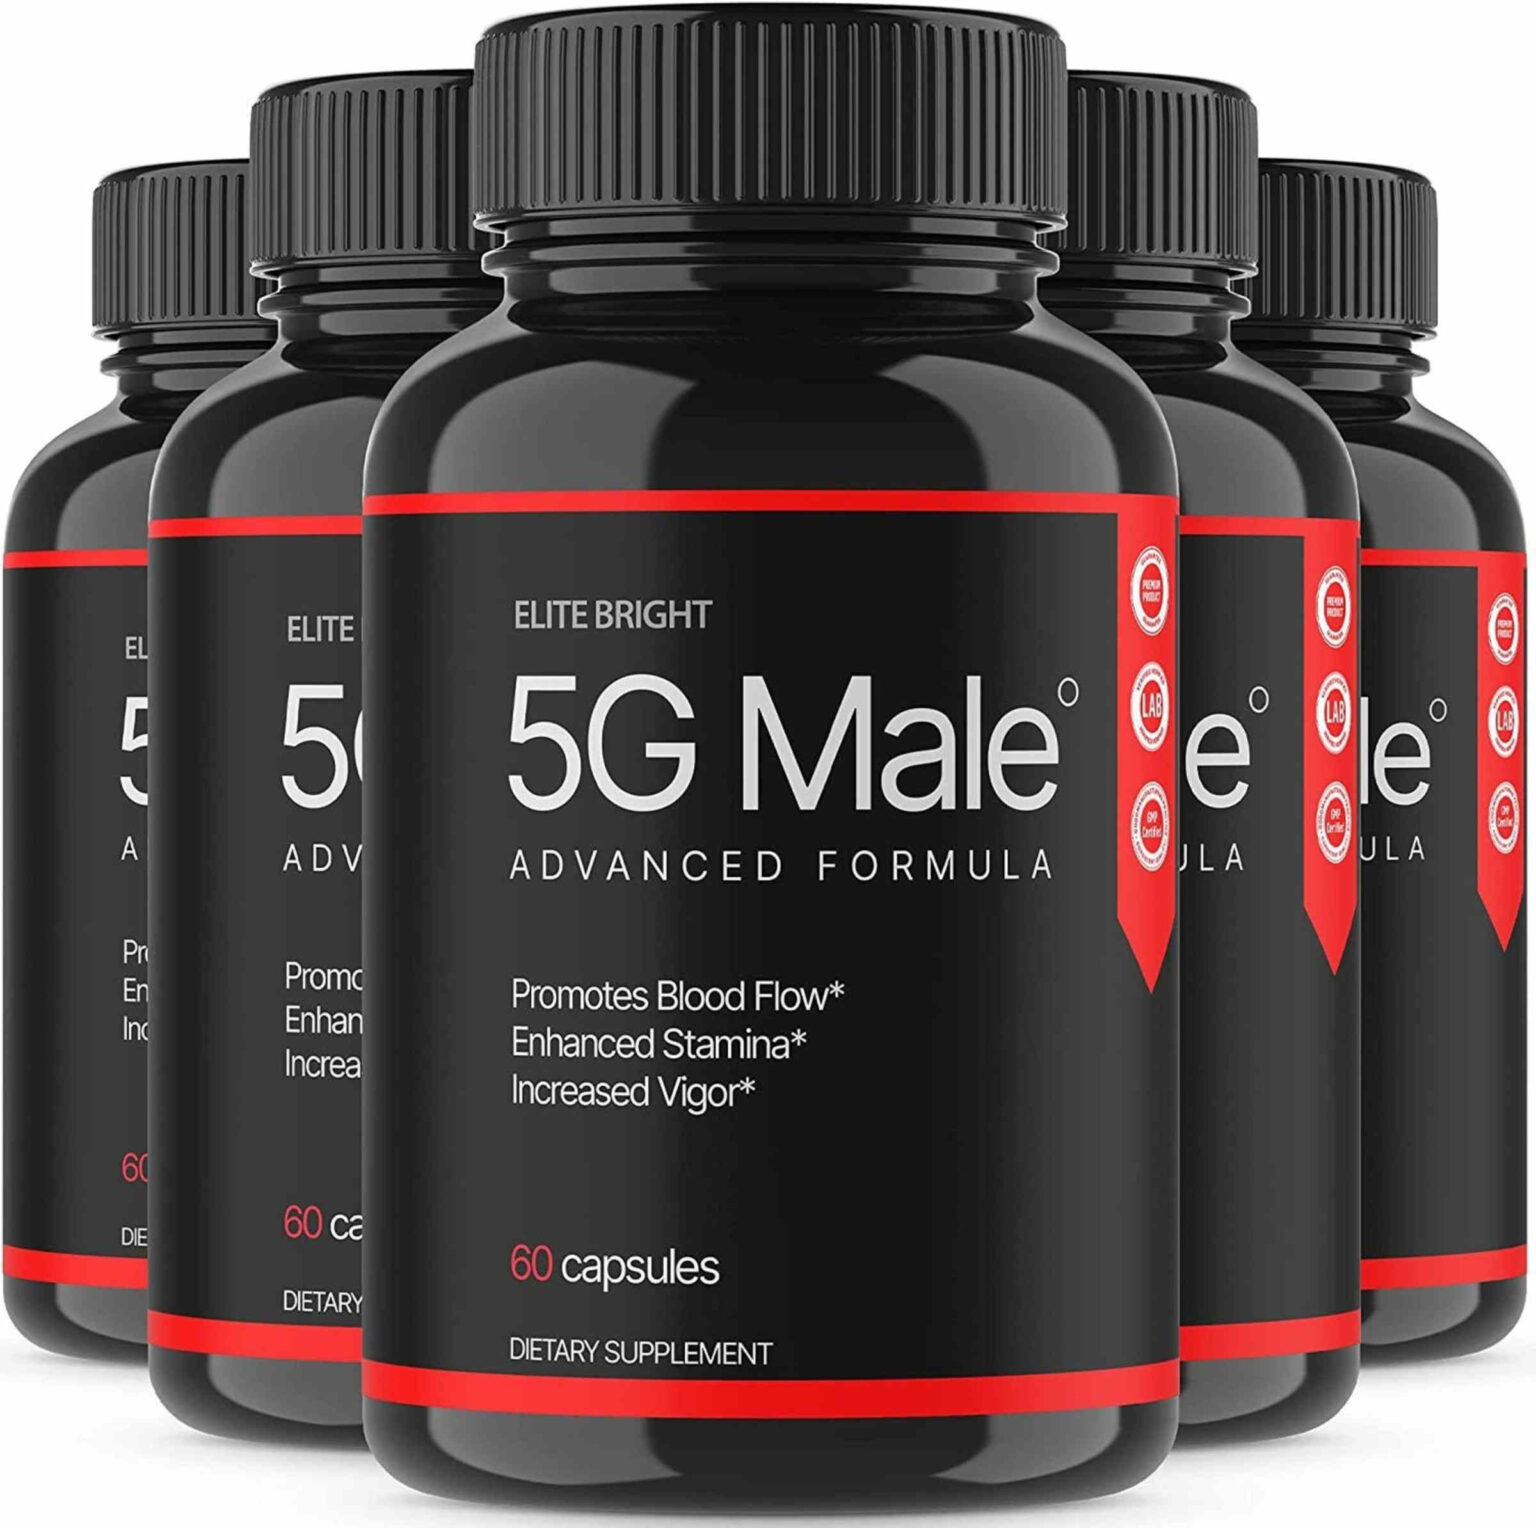 Learn the jaw-dropping secrets of why more men are taking 5G Male enhancement pills and then consult your doctor to see if its right for you!